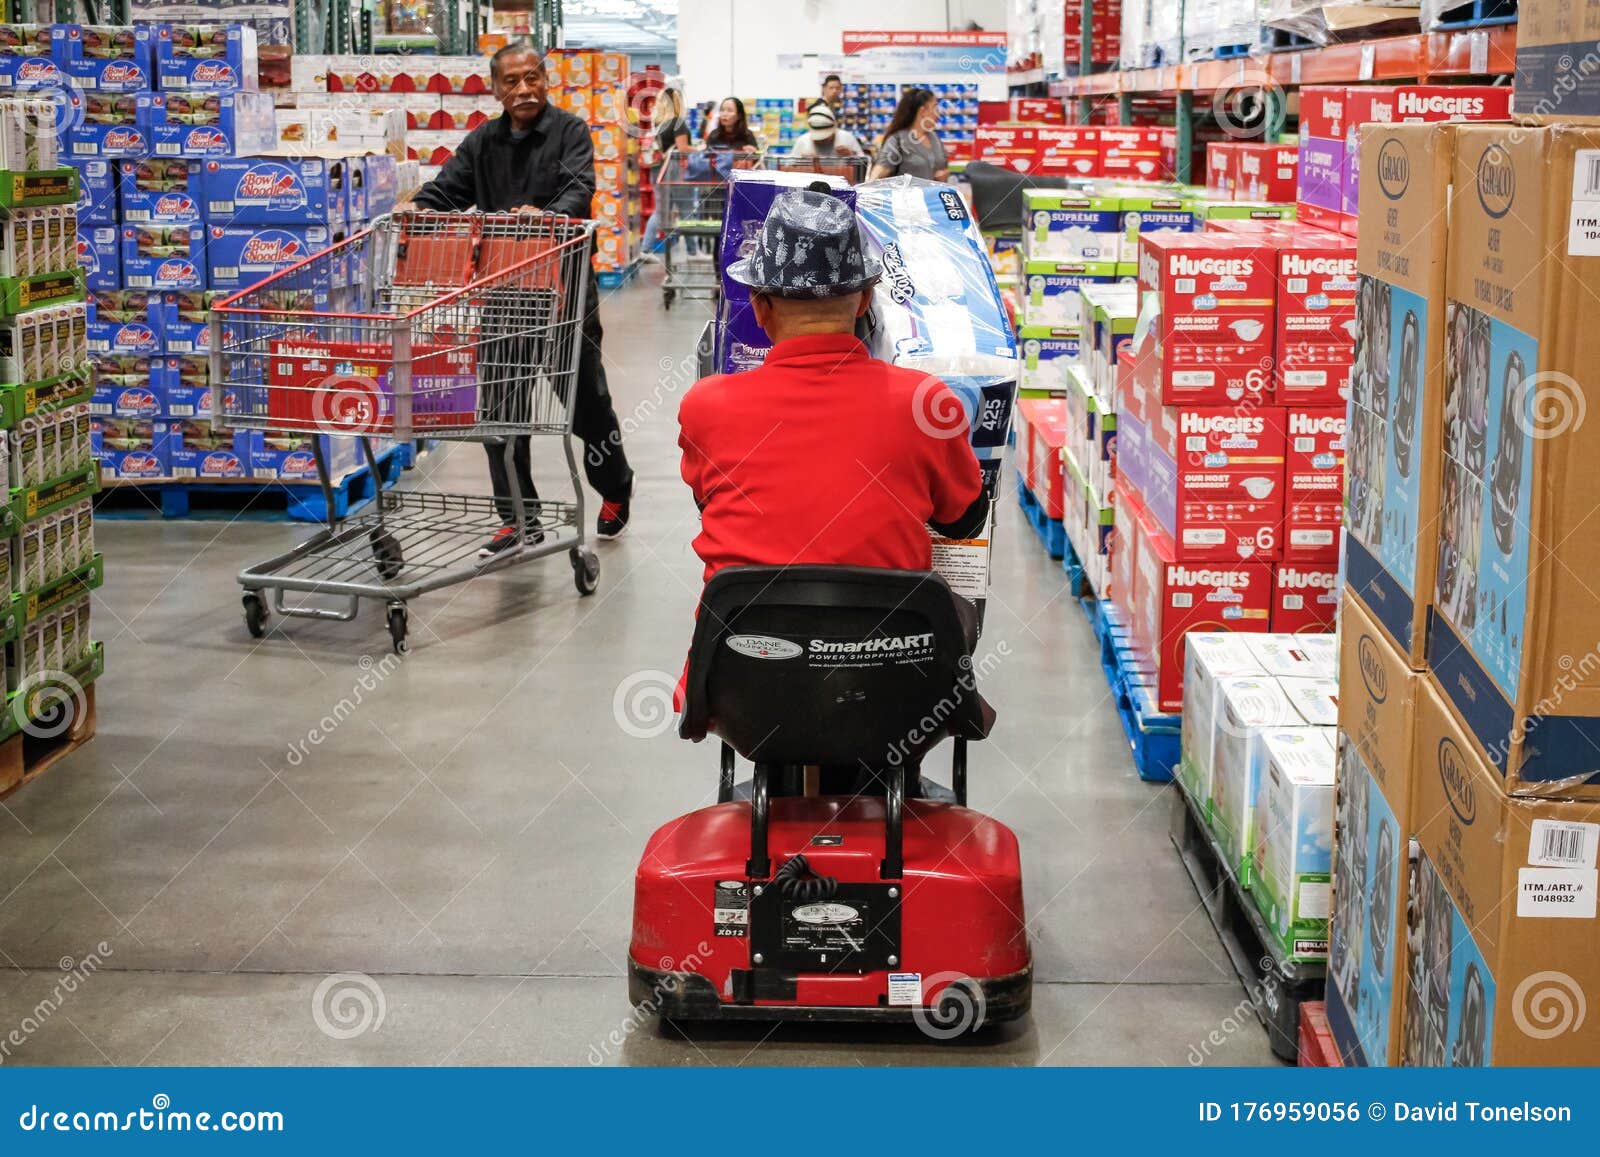 do-costco-have-motorized-carts-wheelchairs-for-customers-crokids